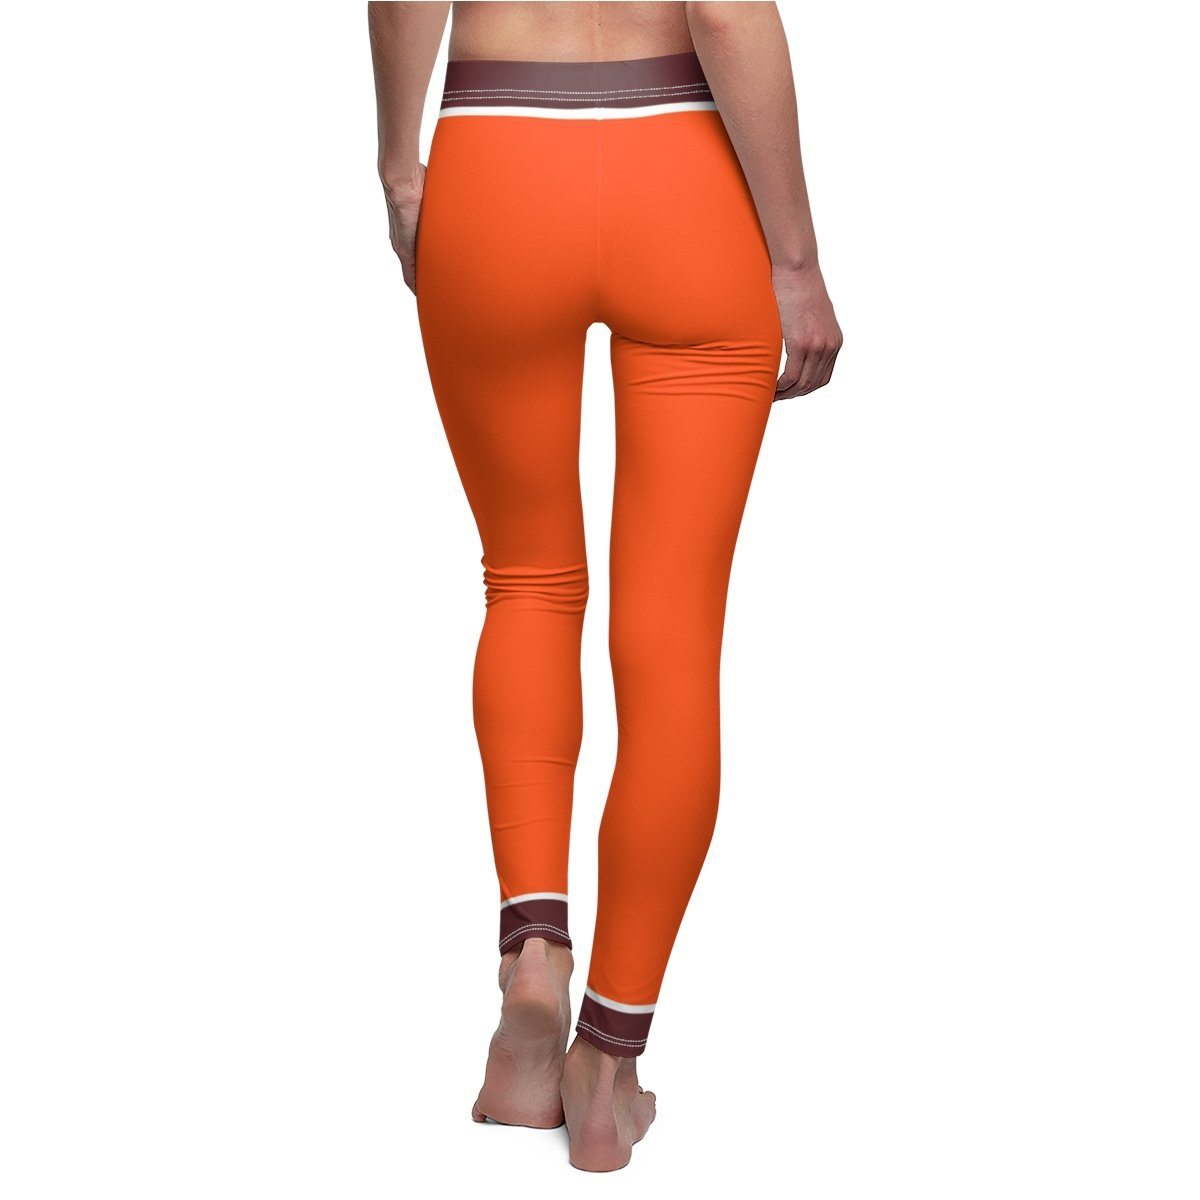 Honeycomb - V.1 - Extreme Sportswear Cut & Sew Leggings Template-Photoshop Template - Photo Solutions